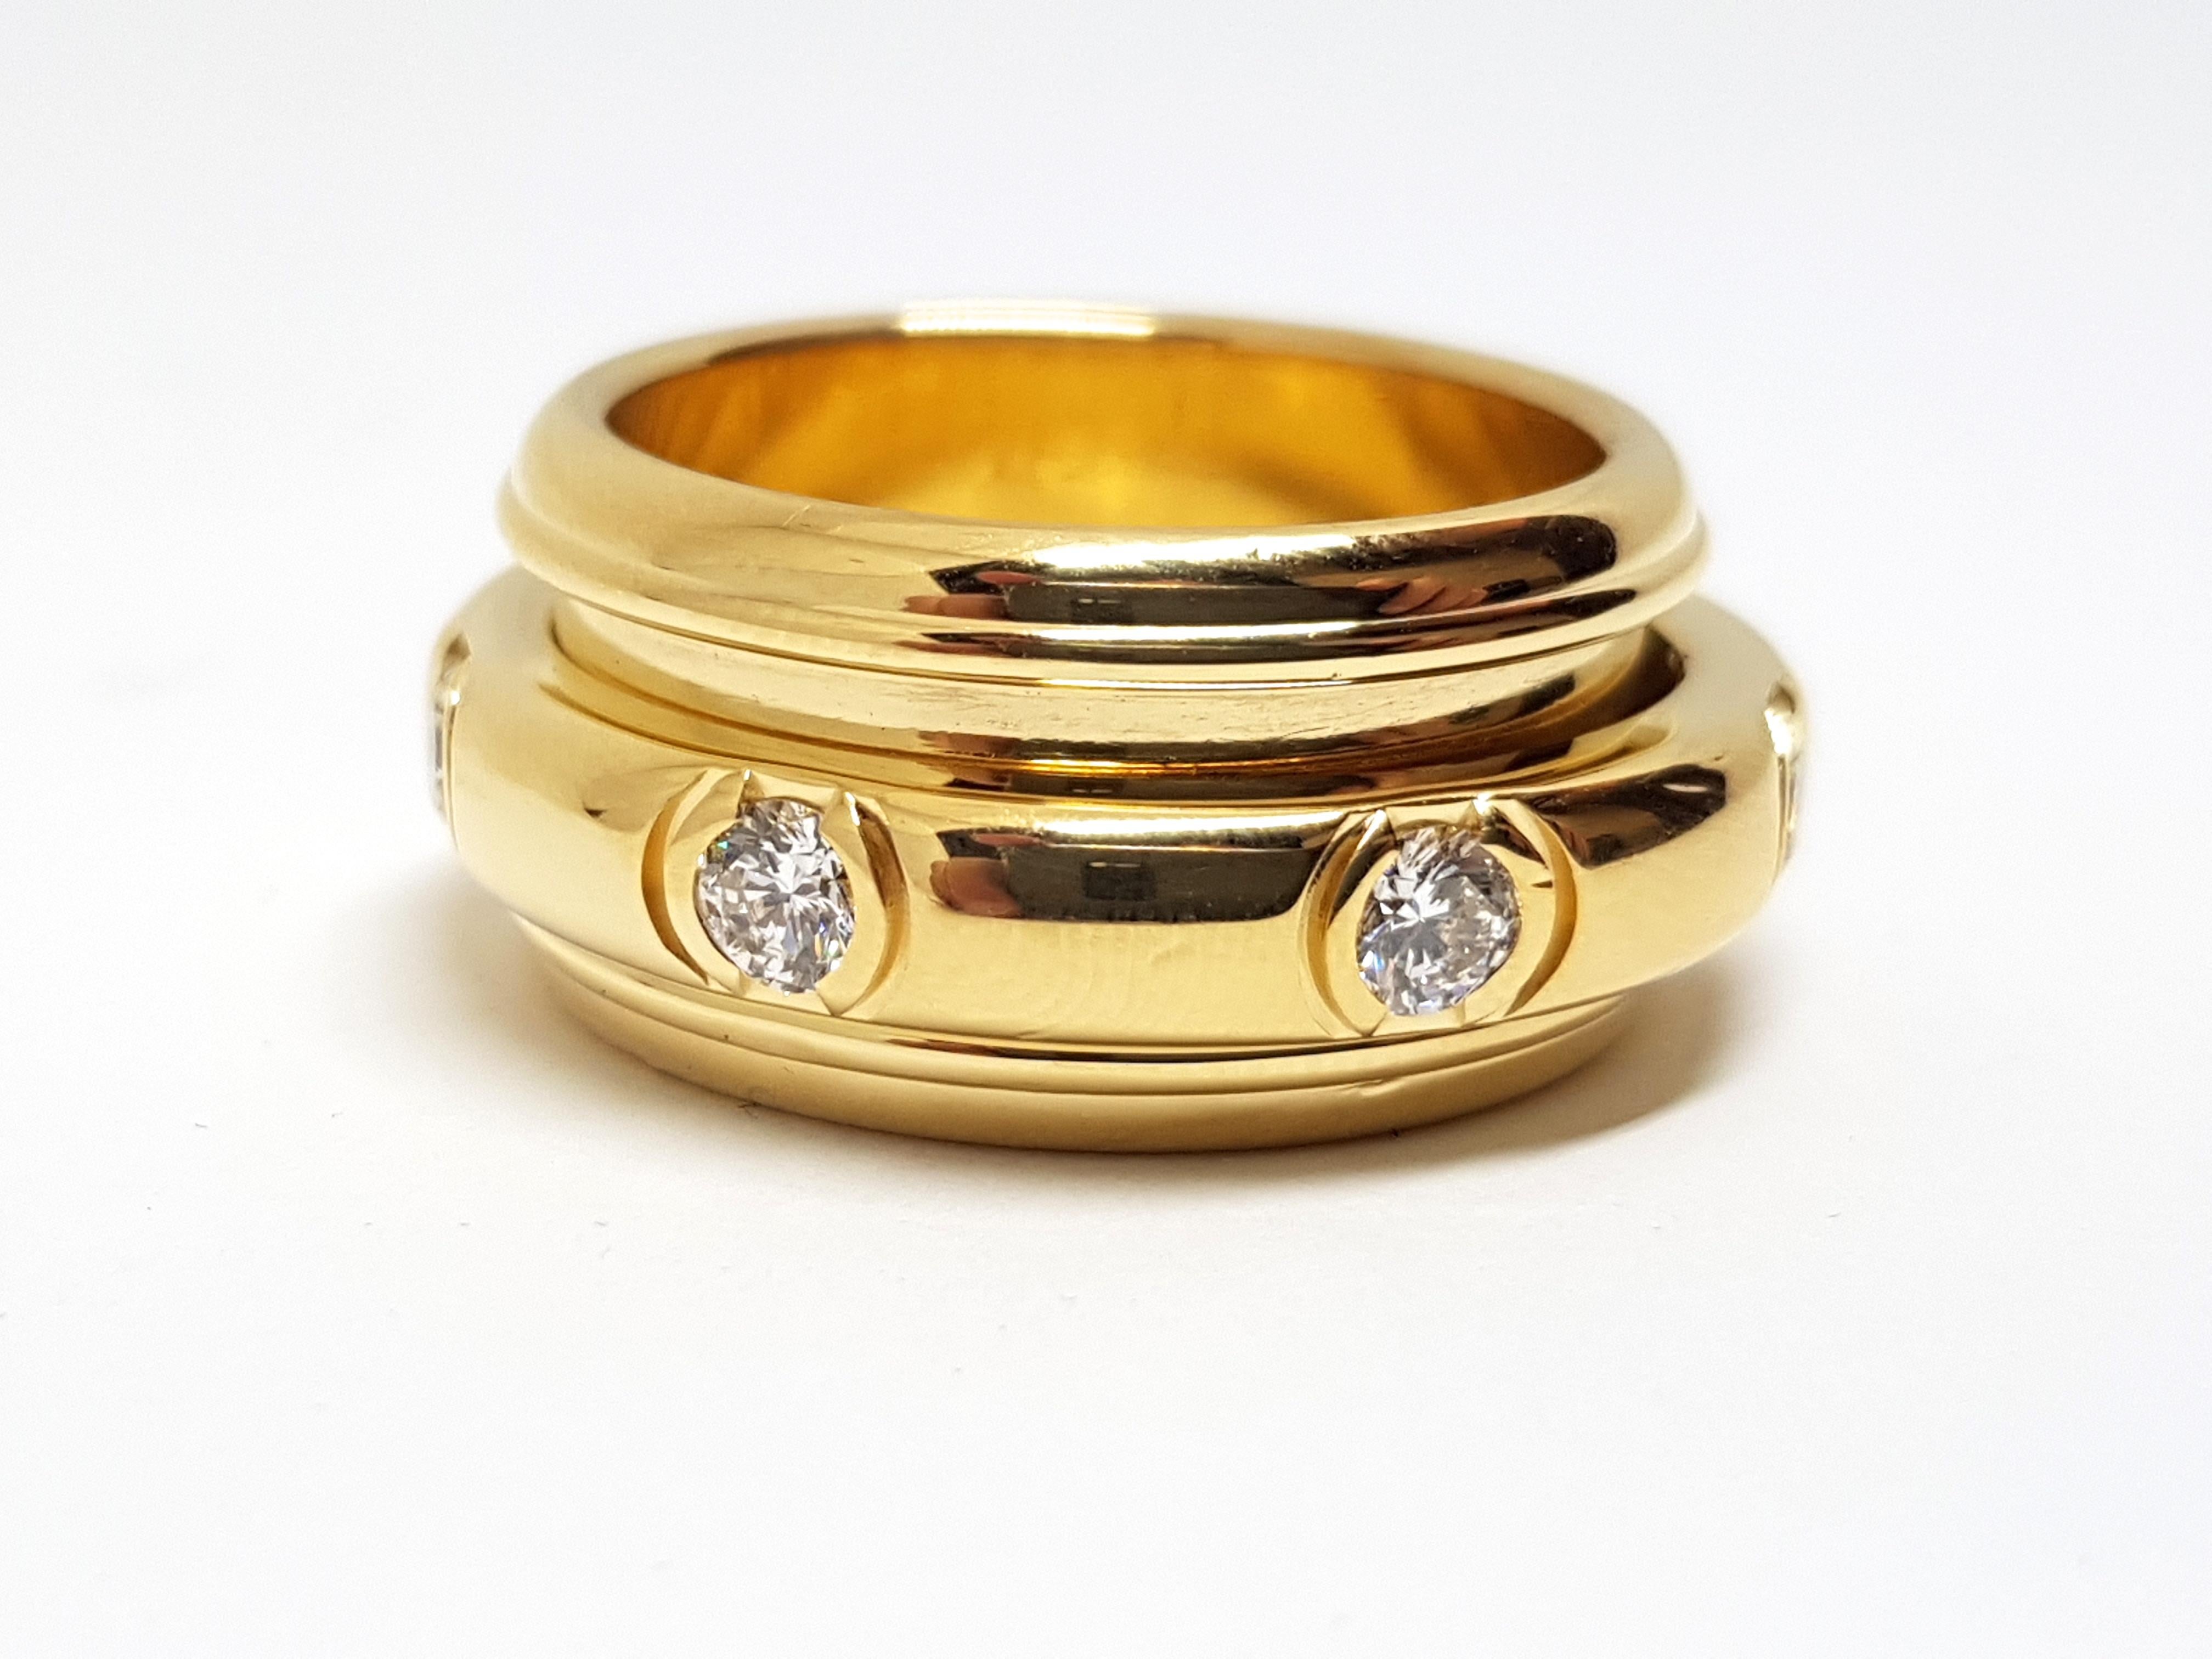 Signed Au 750 pi 55 c Piaget E58550 
Gold: 18 carat yellow gold 
Diamonds: 0.97 ct
Weight: 18.97 gr 
Ring Size: US 7 1/4 / EU 55 / 17,5mm 
Original Piaget Box 
Ring size: 7 
All our jewellery comes with a certificate appraisal and 5 years guarantee 